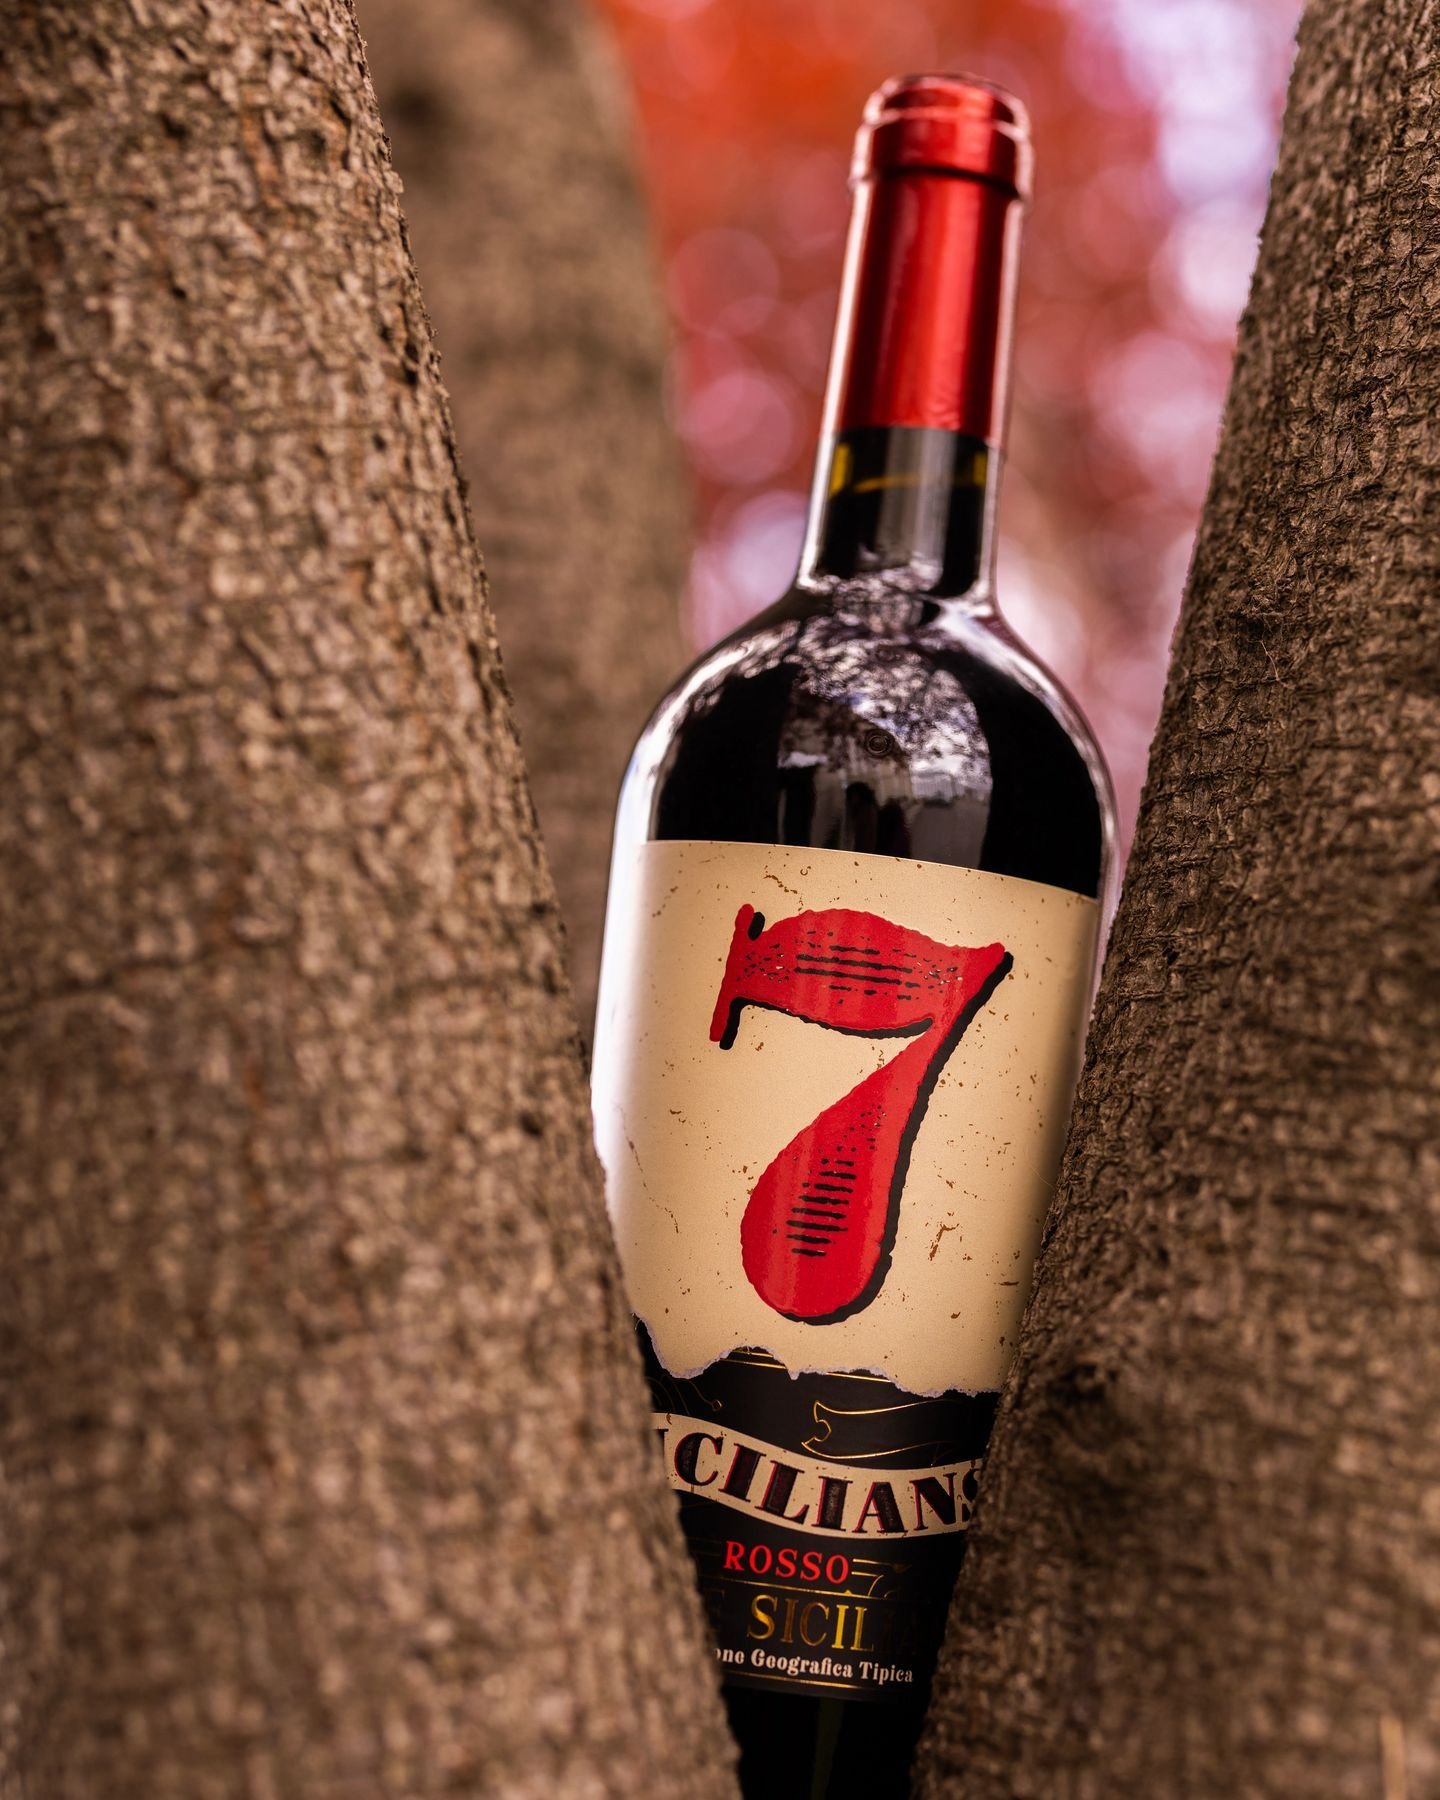 🍷Unleash the sommelier within you as we explore the art of savoring the captivating 7 Sicilians Rosso Terre Siciliane! This Sicilian blend charms with its deep purple-red hue and a captivating plum, cherry, and chocolate bouquet. 
 
🍇 Pop the cork 